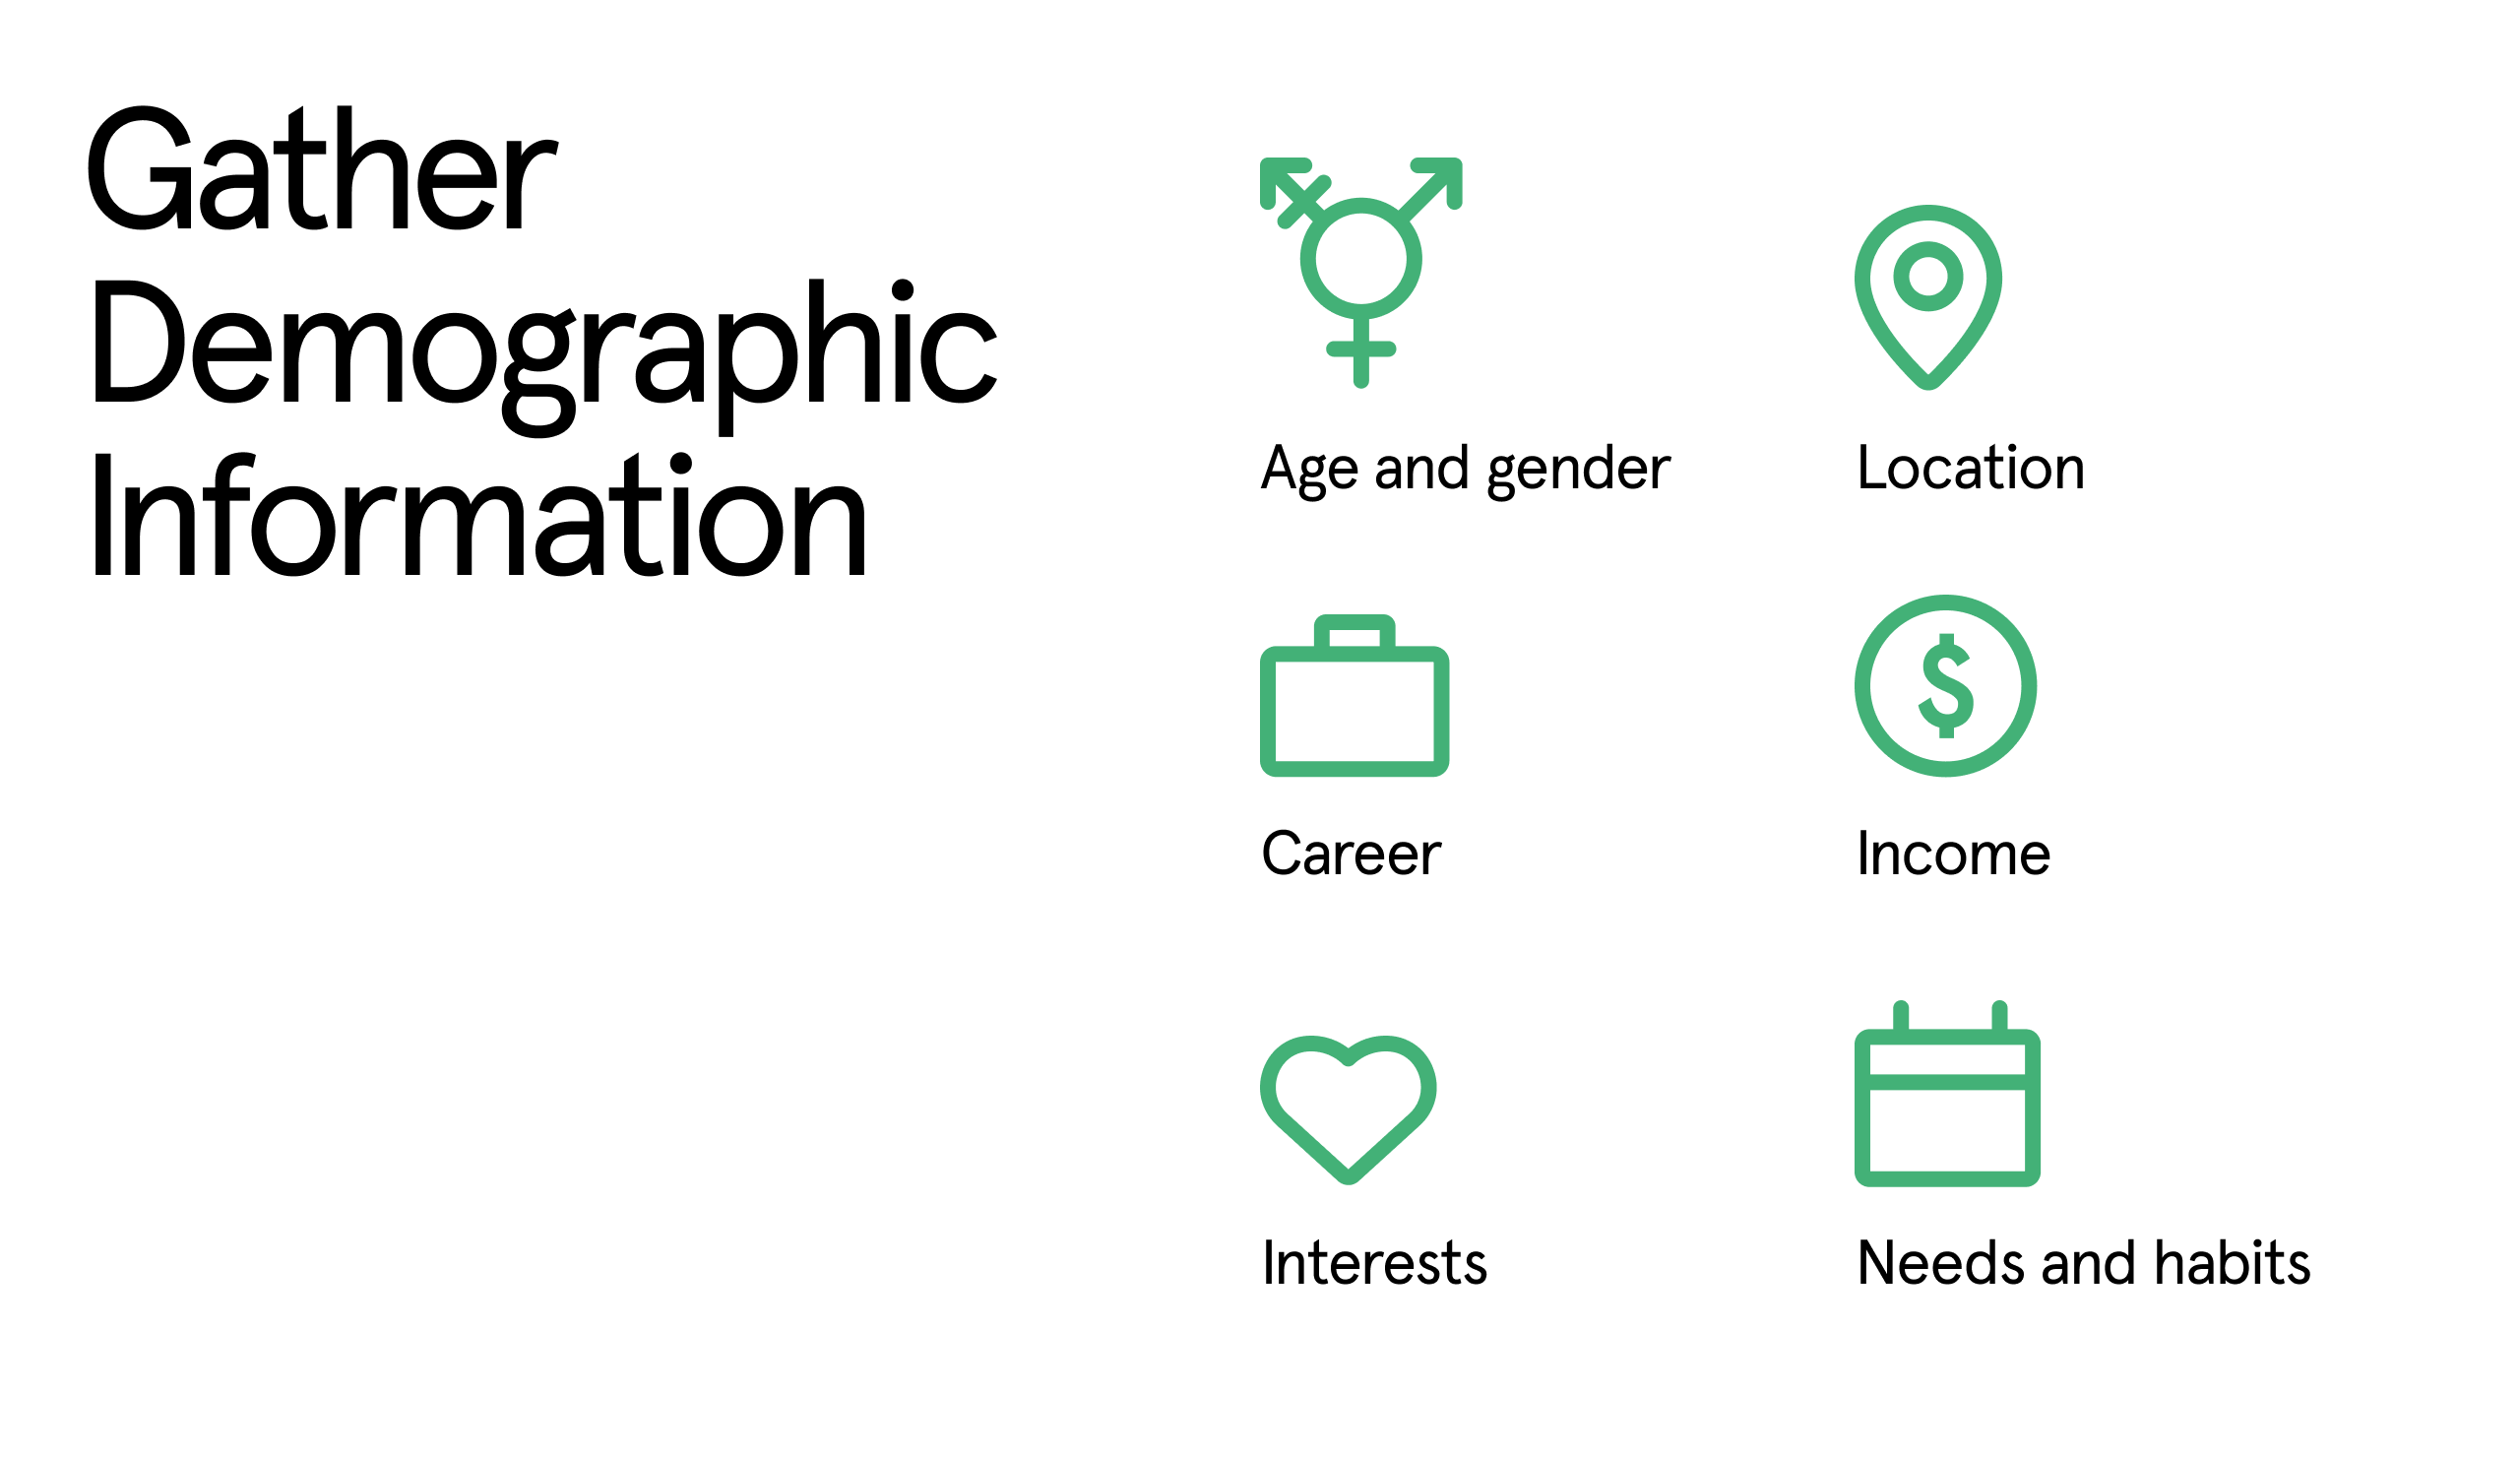 Gather demographic information such as age and gender, location, career, income, interests, needs, and habits.